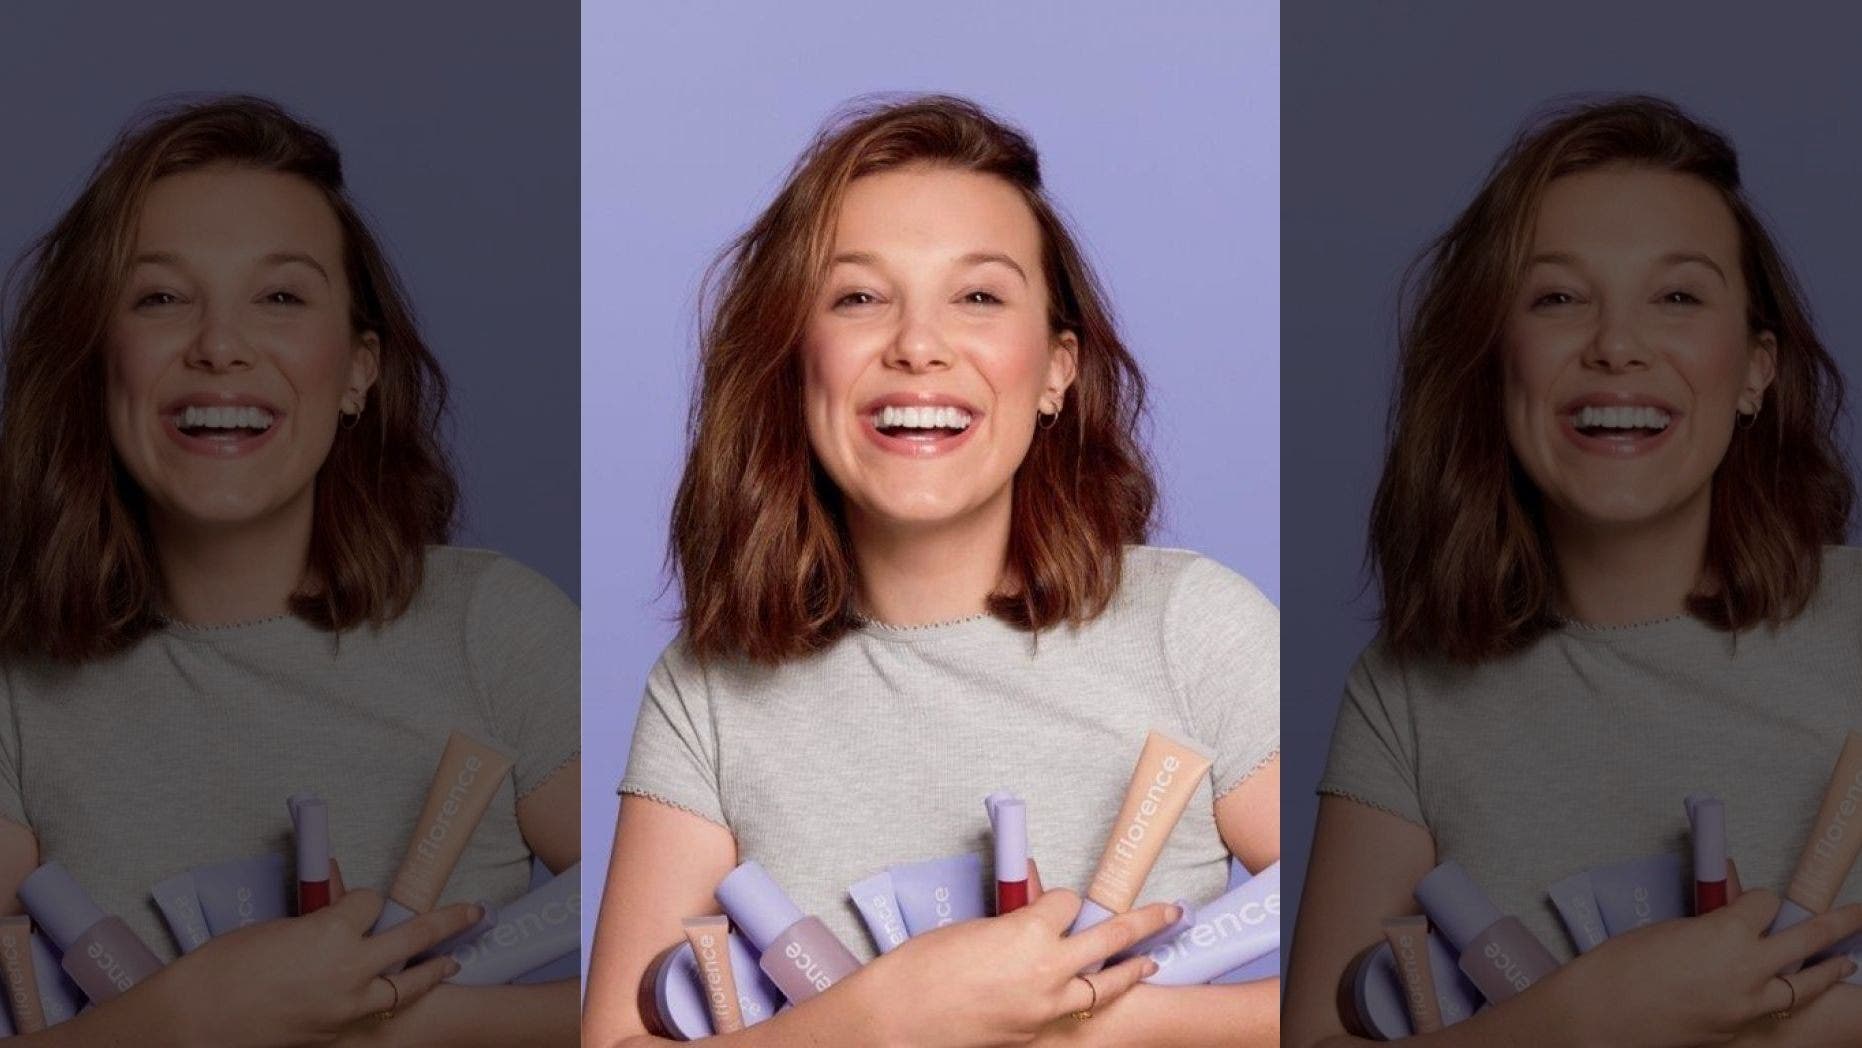 Clean and Natural Beauty by Millie Bobby Brown